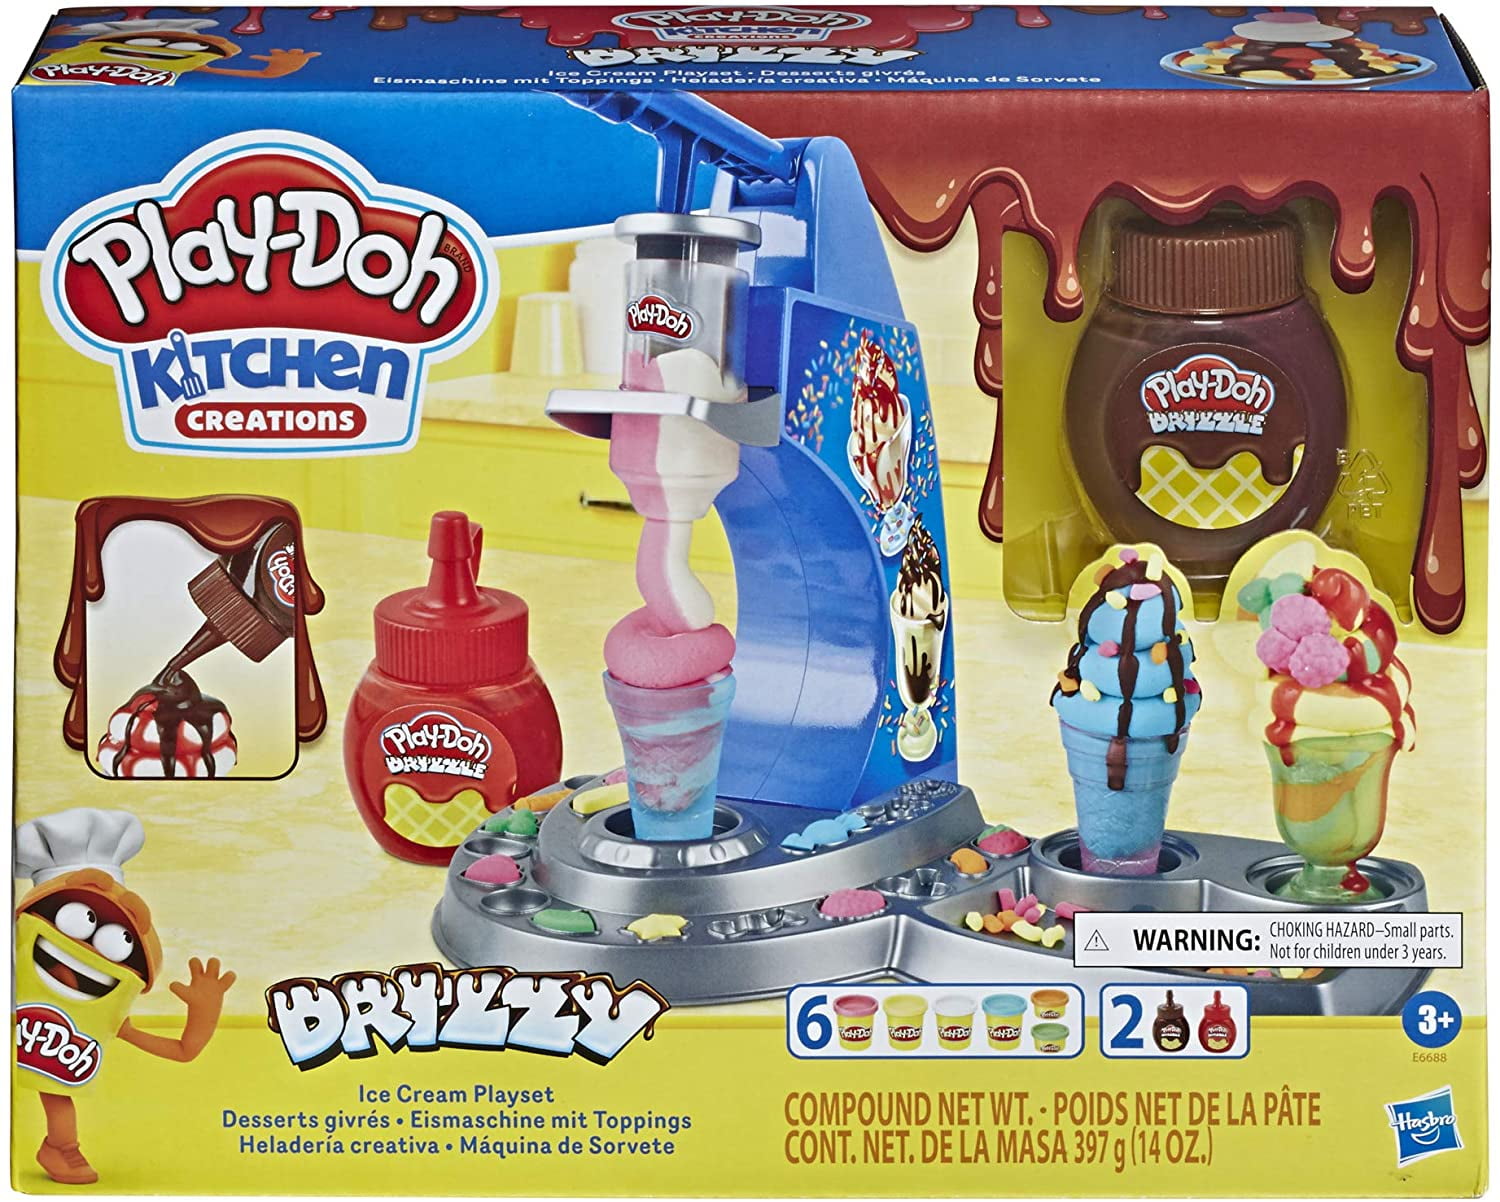 Play-Doh Large Tools and Storage Playset, Arts and Crafts for Kids with 20  Tools and 8 Colors, Preschool Toys for 3 Year Old Girls and Boys and Up